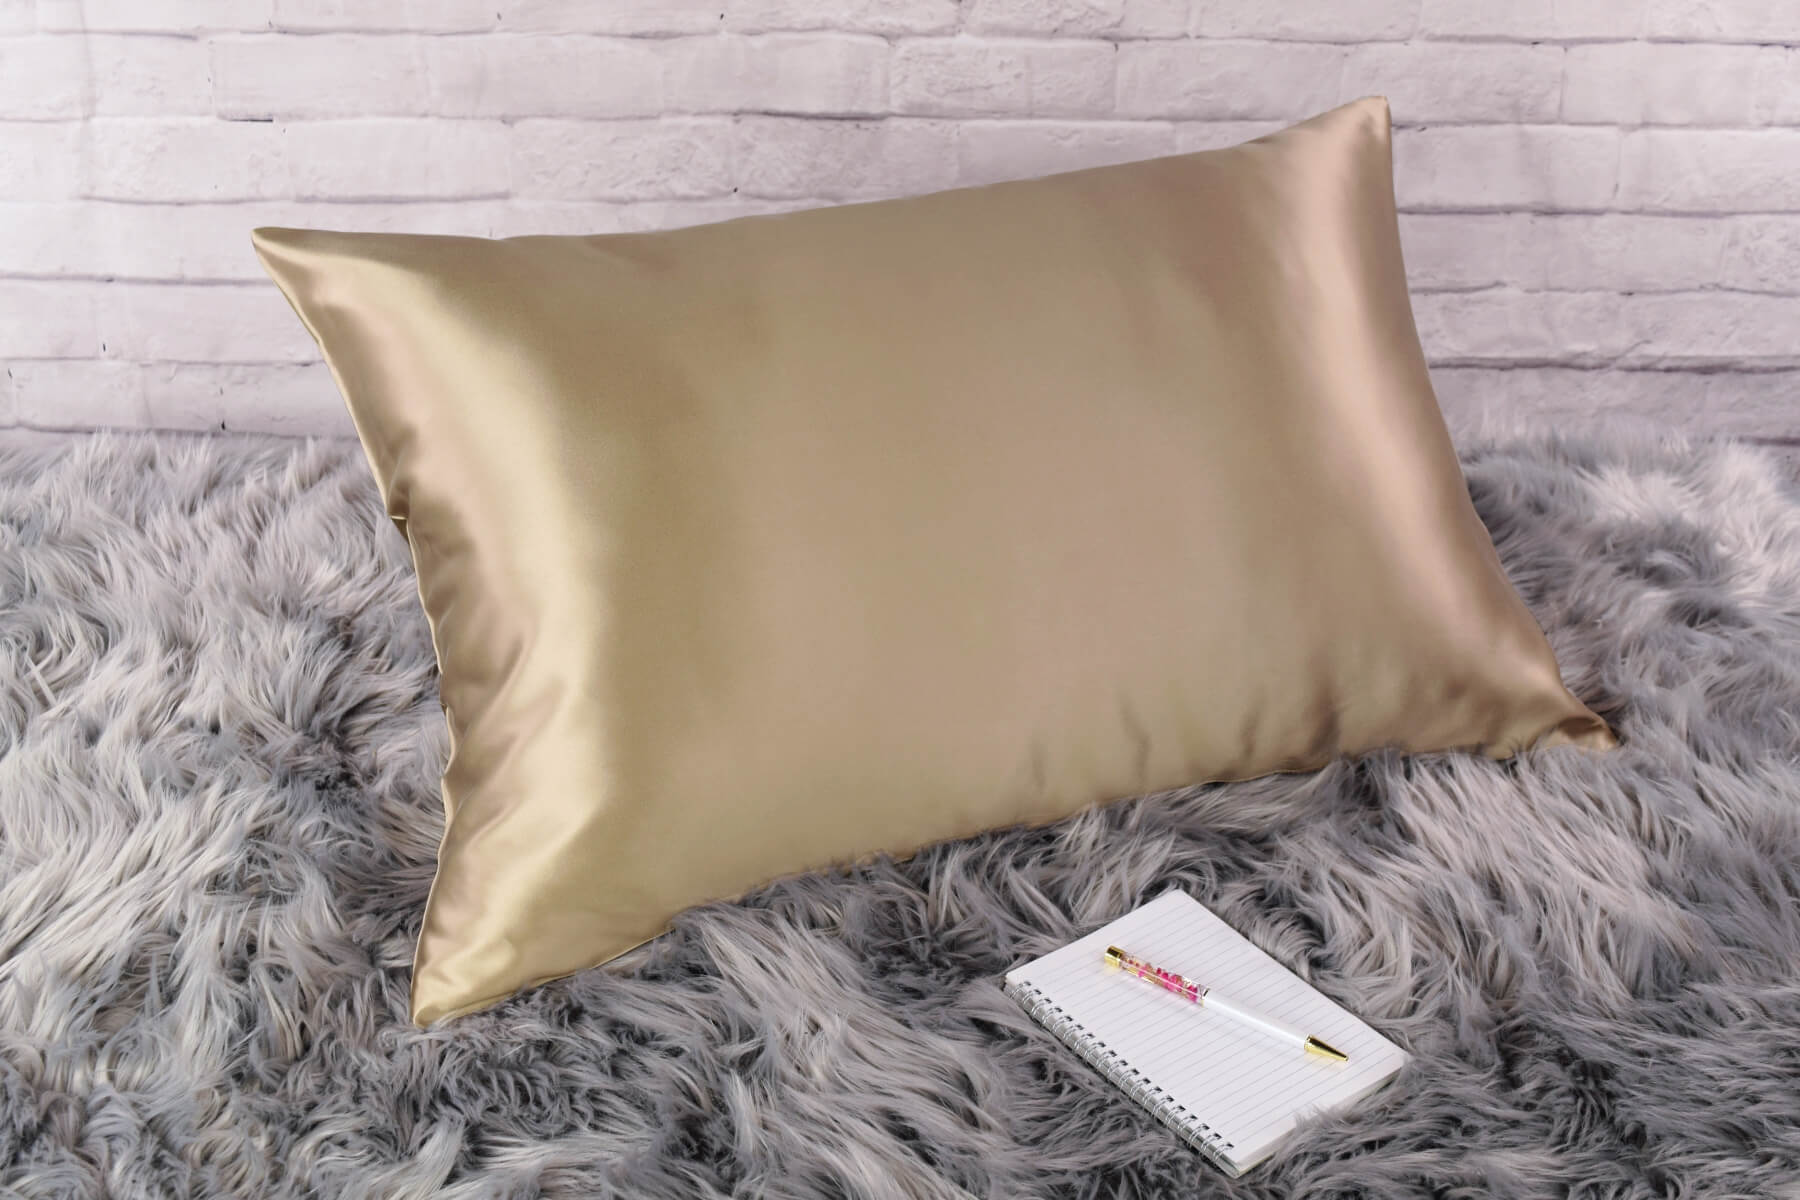 Celestial Silk Dark taupe 25 momme Silk Pillowcase on rug with notebook and pretty pen